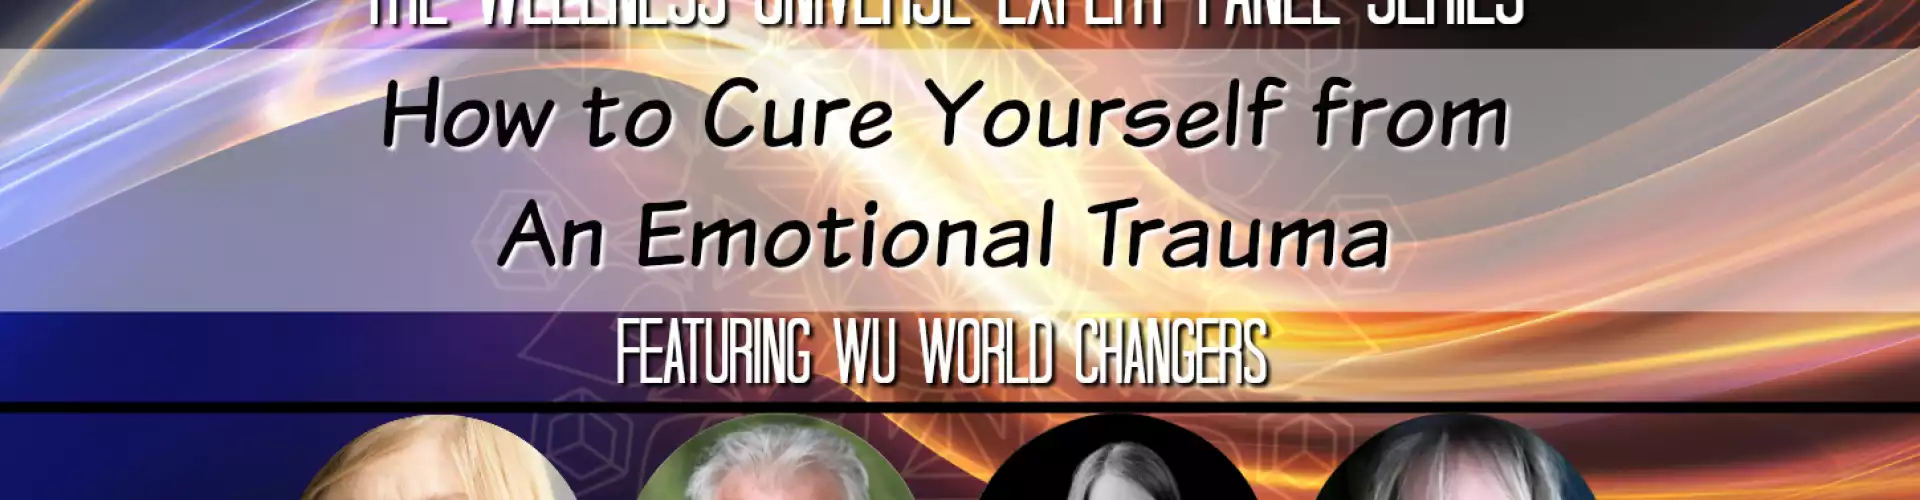 WU Expert Panel April 2019: How to Cure Yourself from An Emotional Trauma